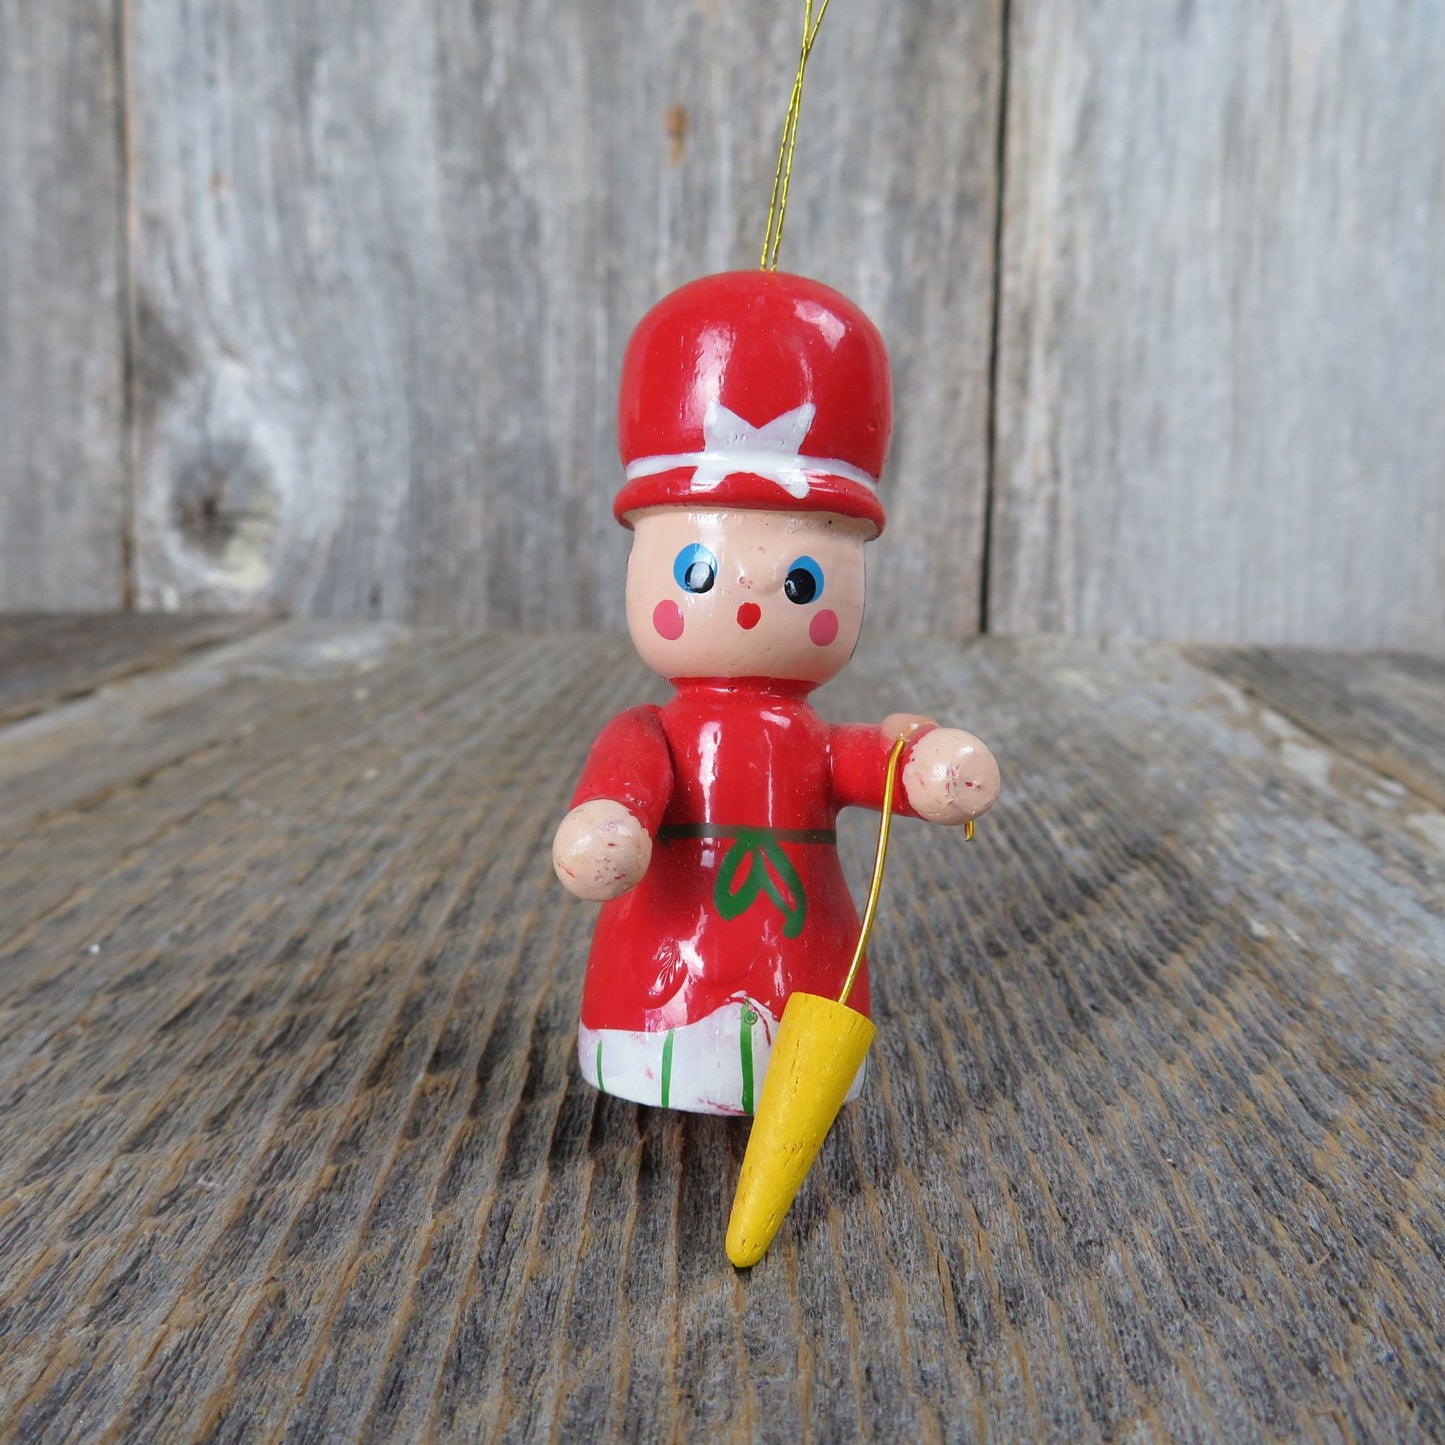 Vintage Wooden Lady with Umbrella Ornament Wood Red Dress Hat Mrs. Claus Fancy